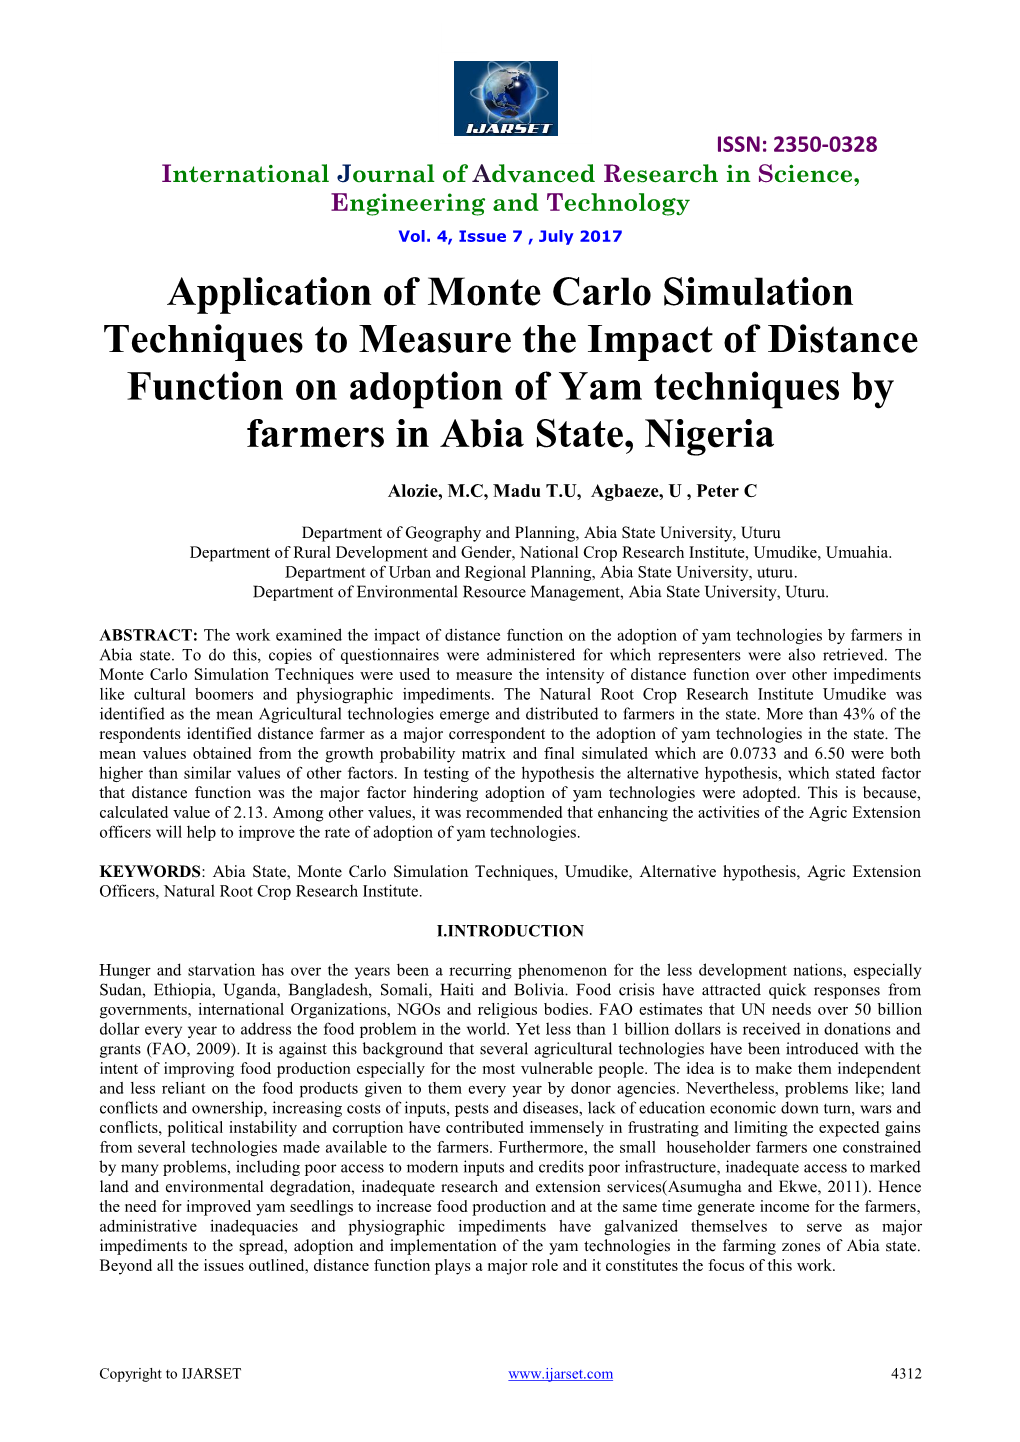 Application of Monte Carlo Simulation Techniques to Measure the Impact of Distance Function on Adoption of Yam Techniques by Farmers in Abia State, Nigeria